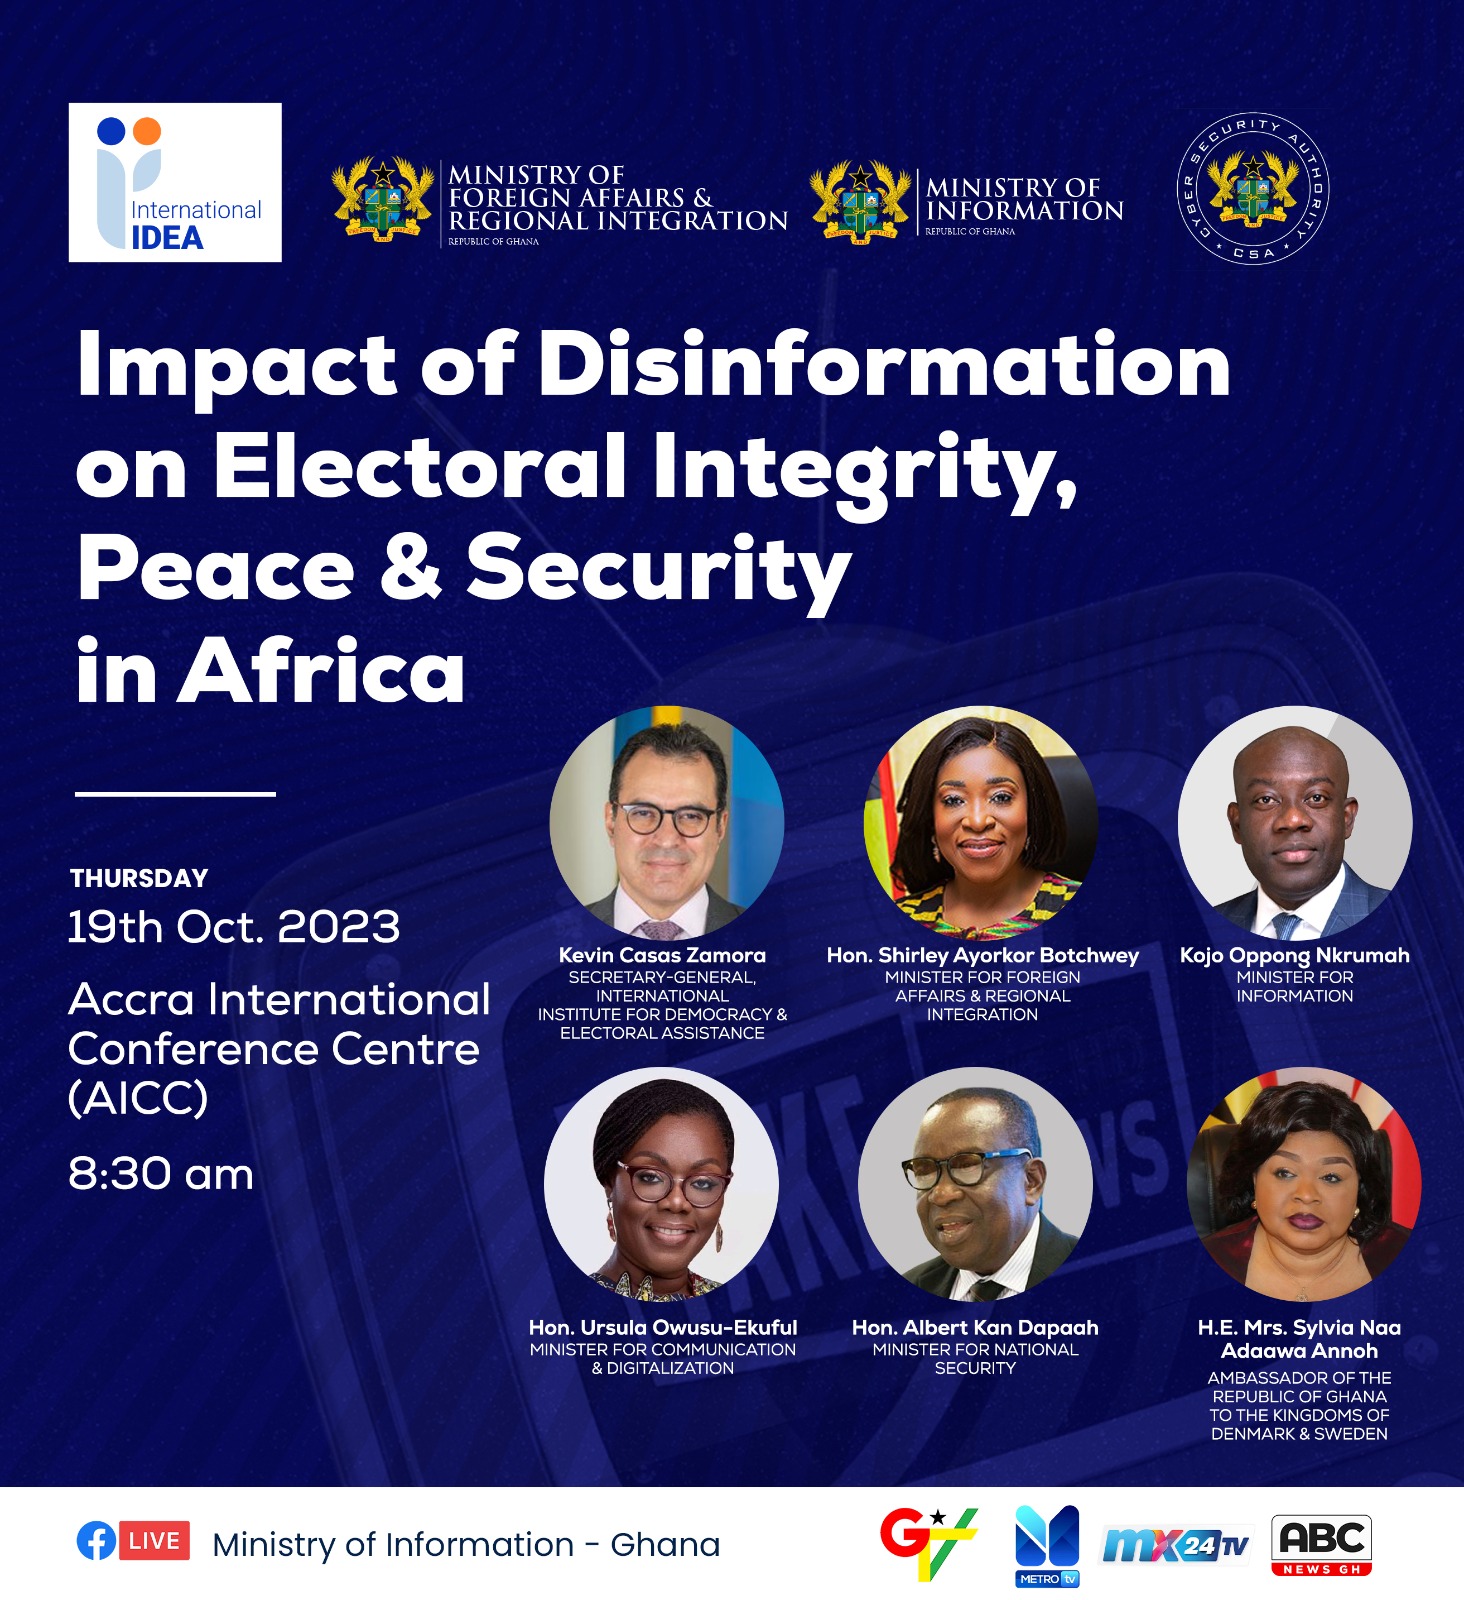 Gov't to hold Seminar on Impact of Disinformation